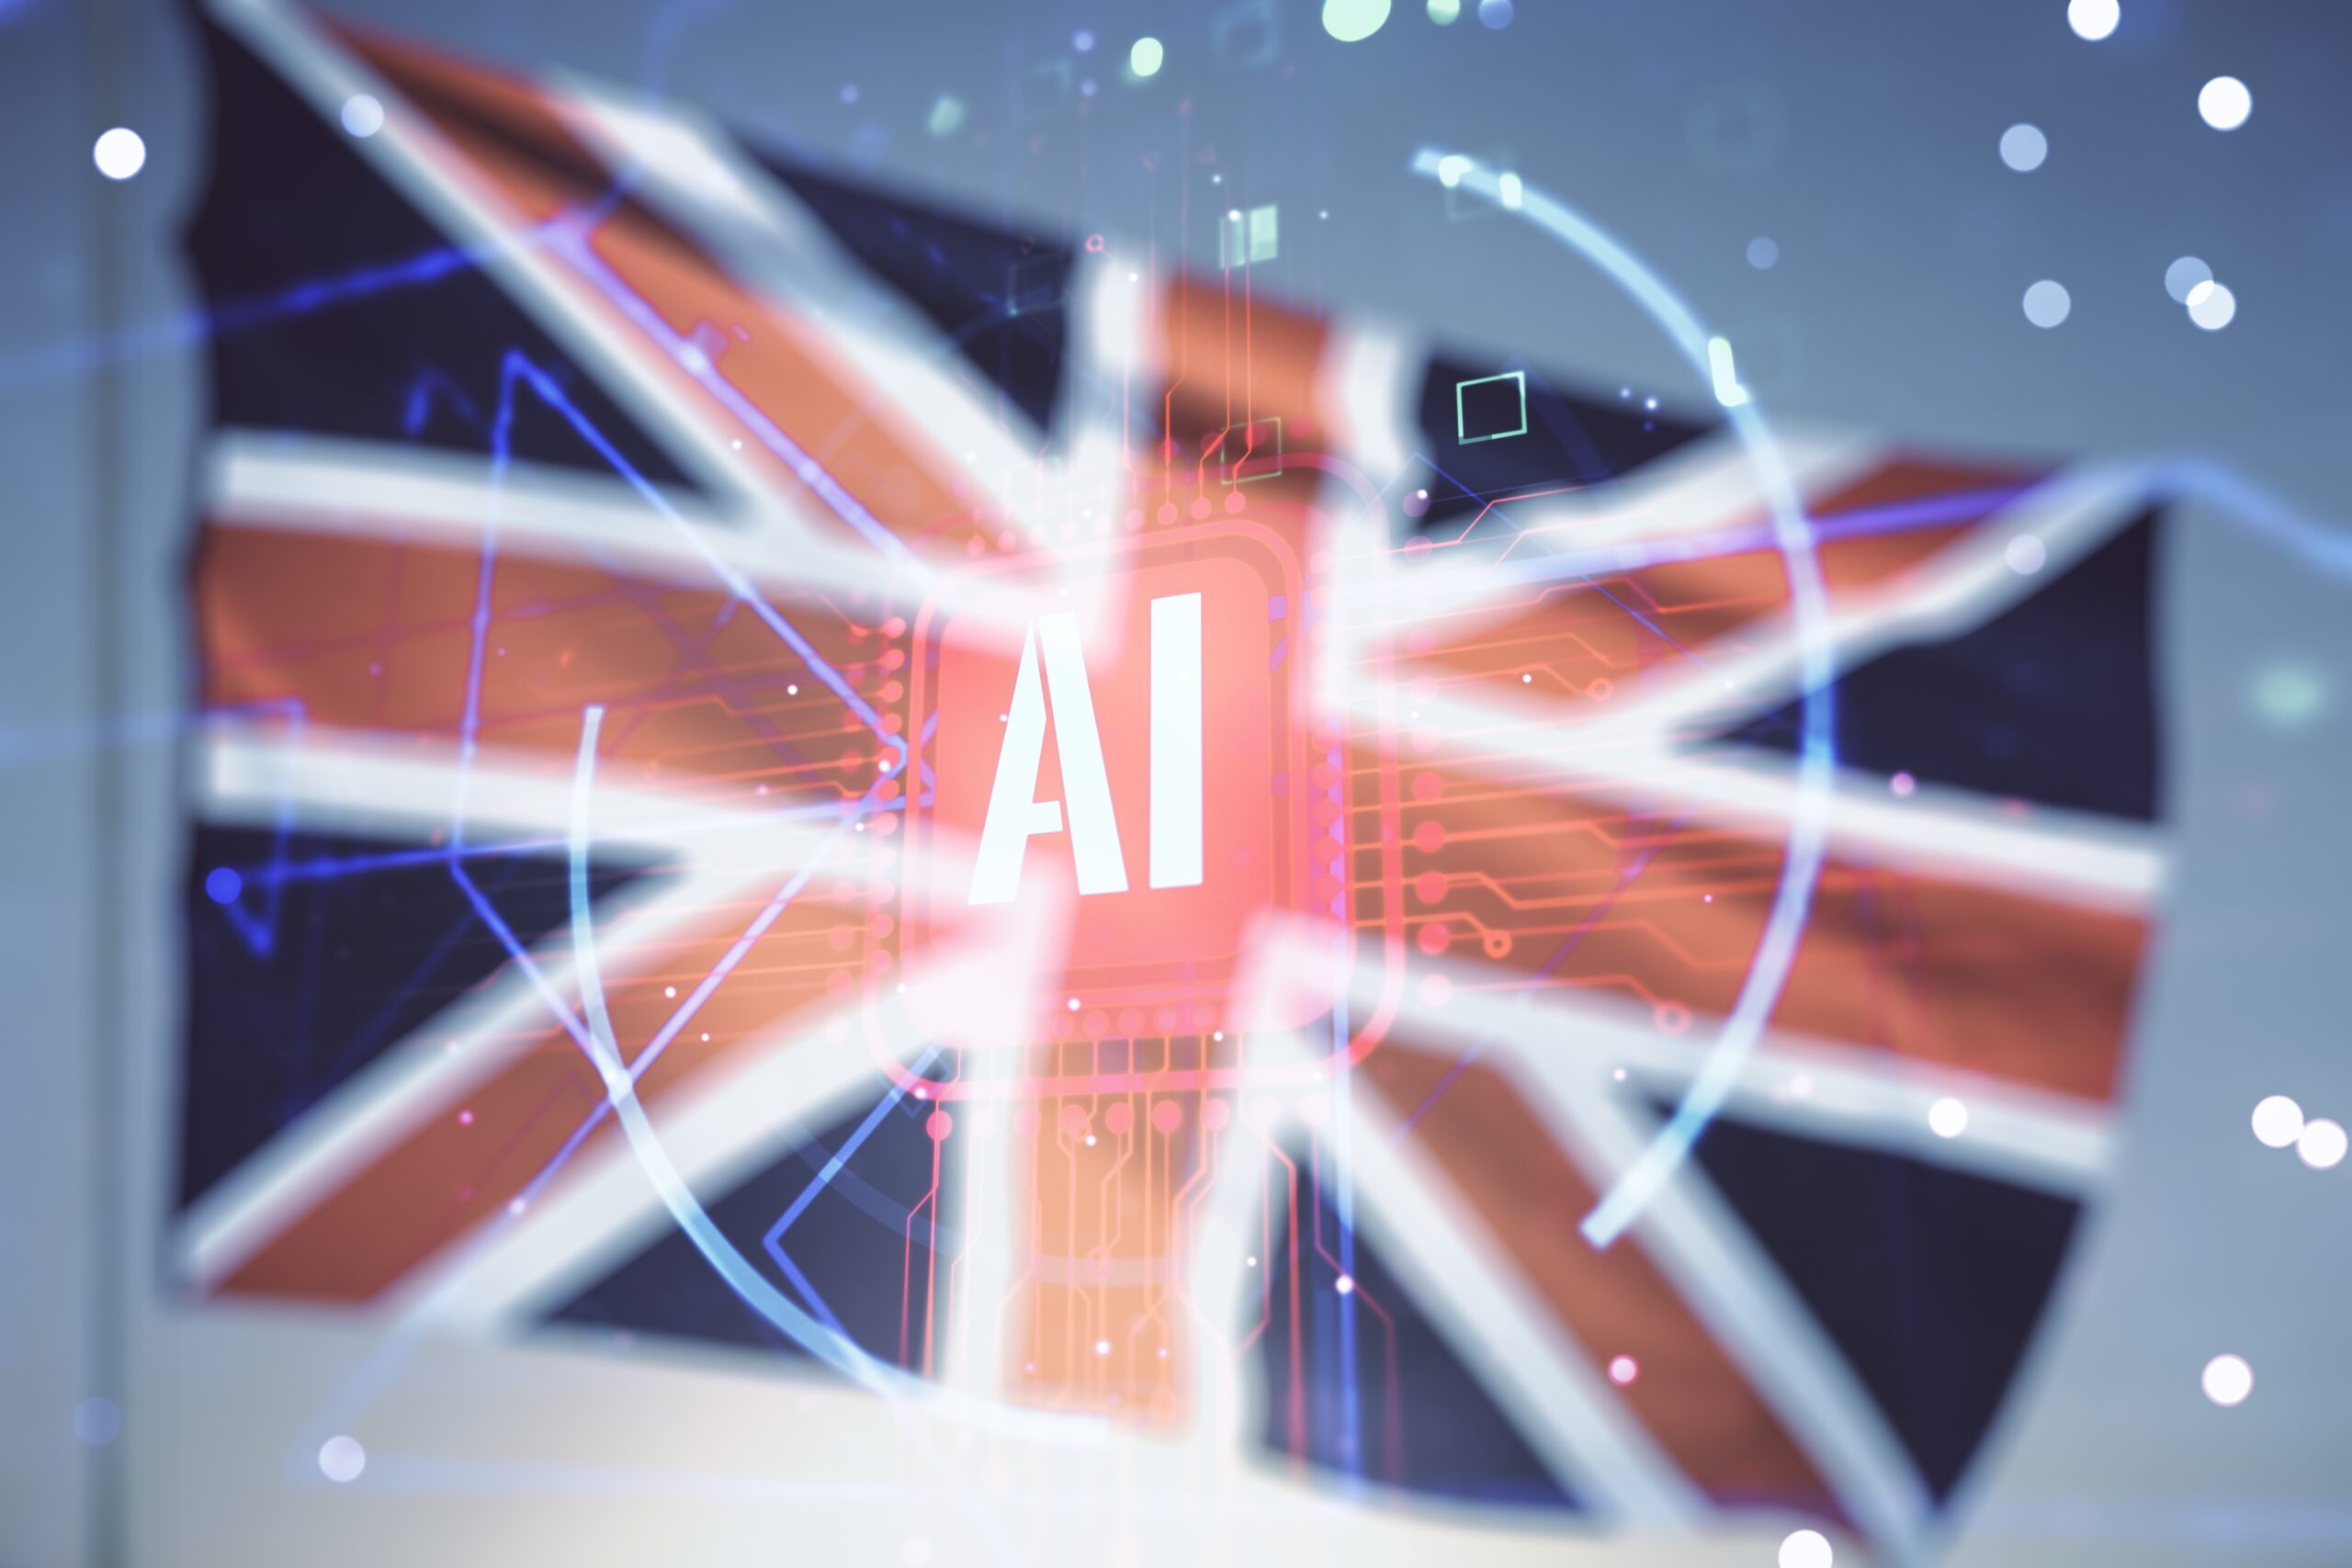 San Francisco Welcomes New Office of UK AI Safety Institute This Summer